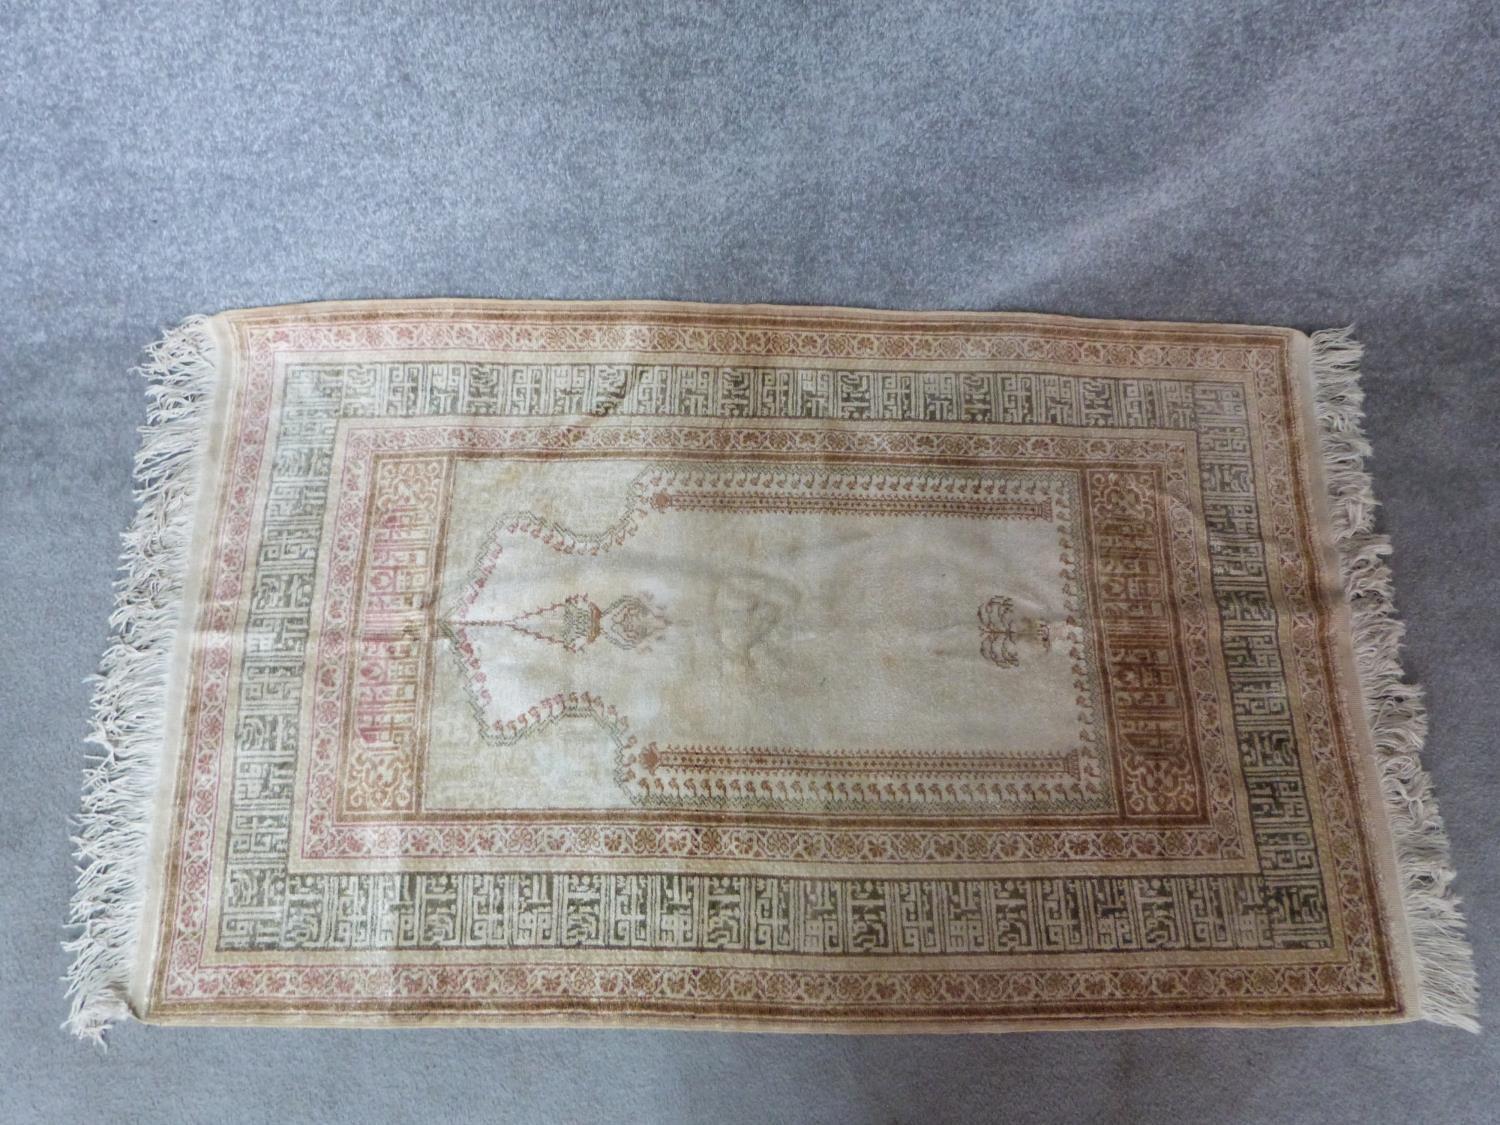 A woven Turkish prayer rug with Mehrab and lamp, mosque and calligraphy border design. 154x88 - Image 9 of 9